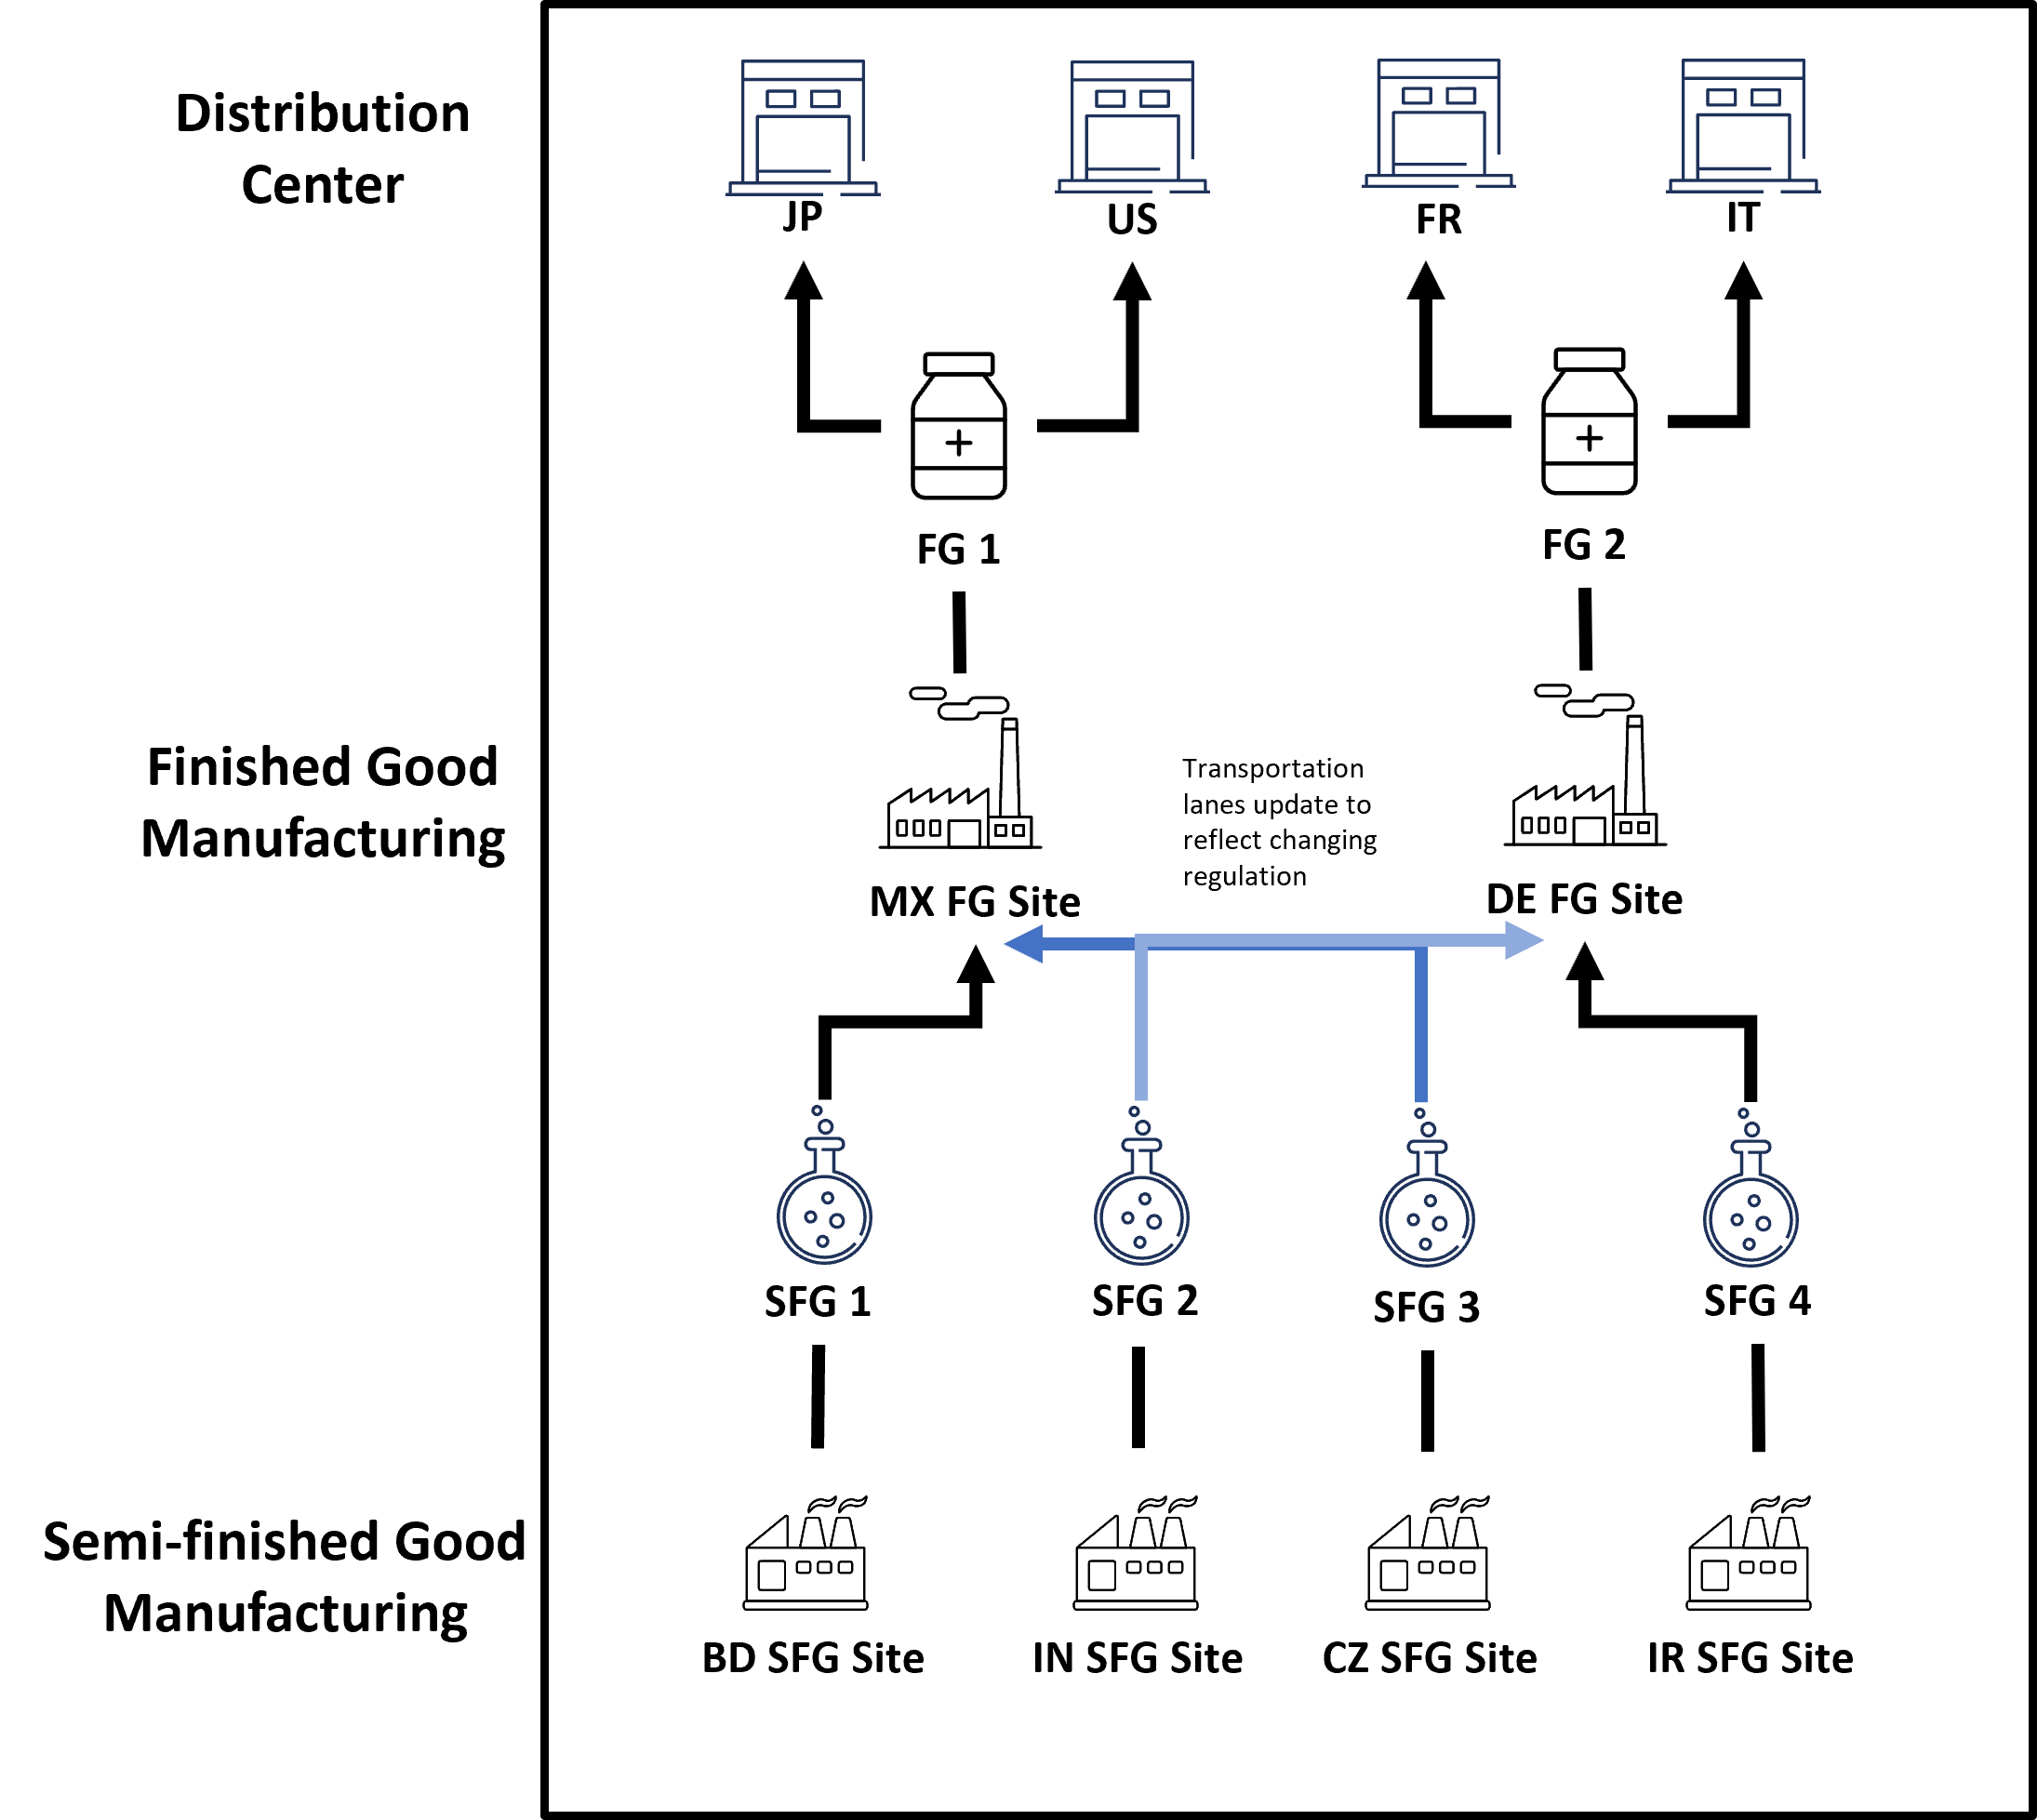 Figure 2: Supply Optimizer network with capacity constraints